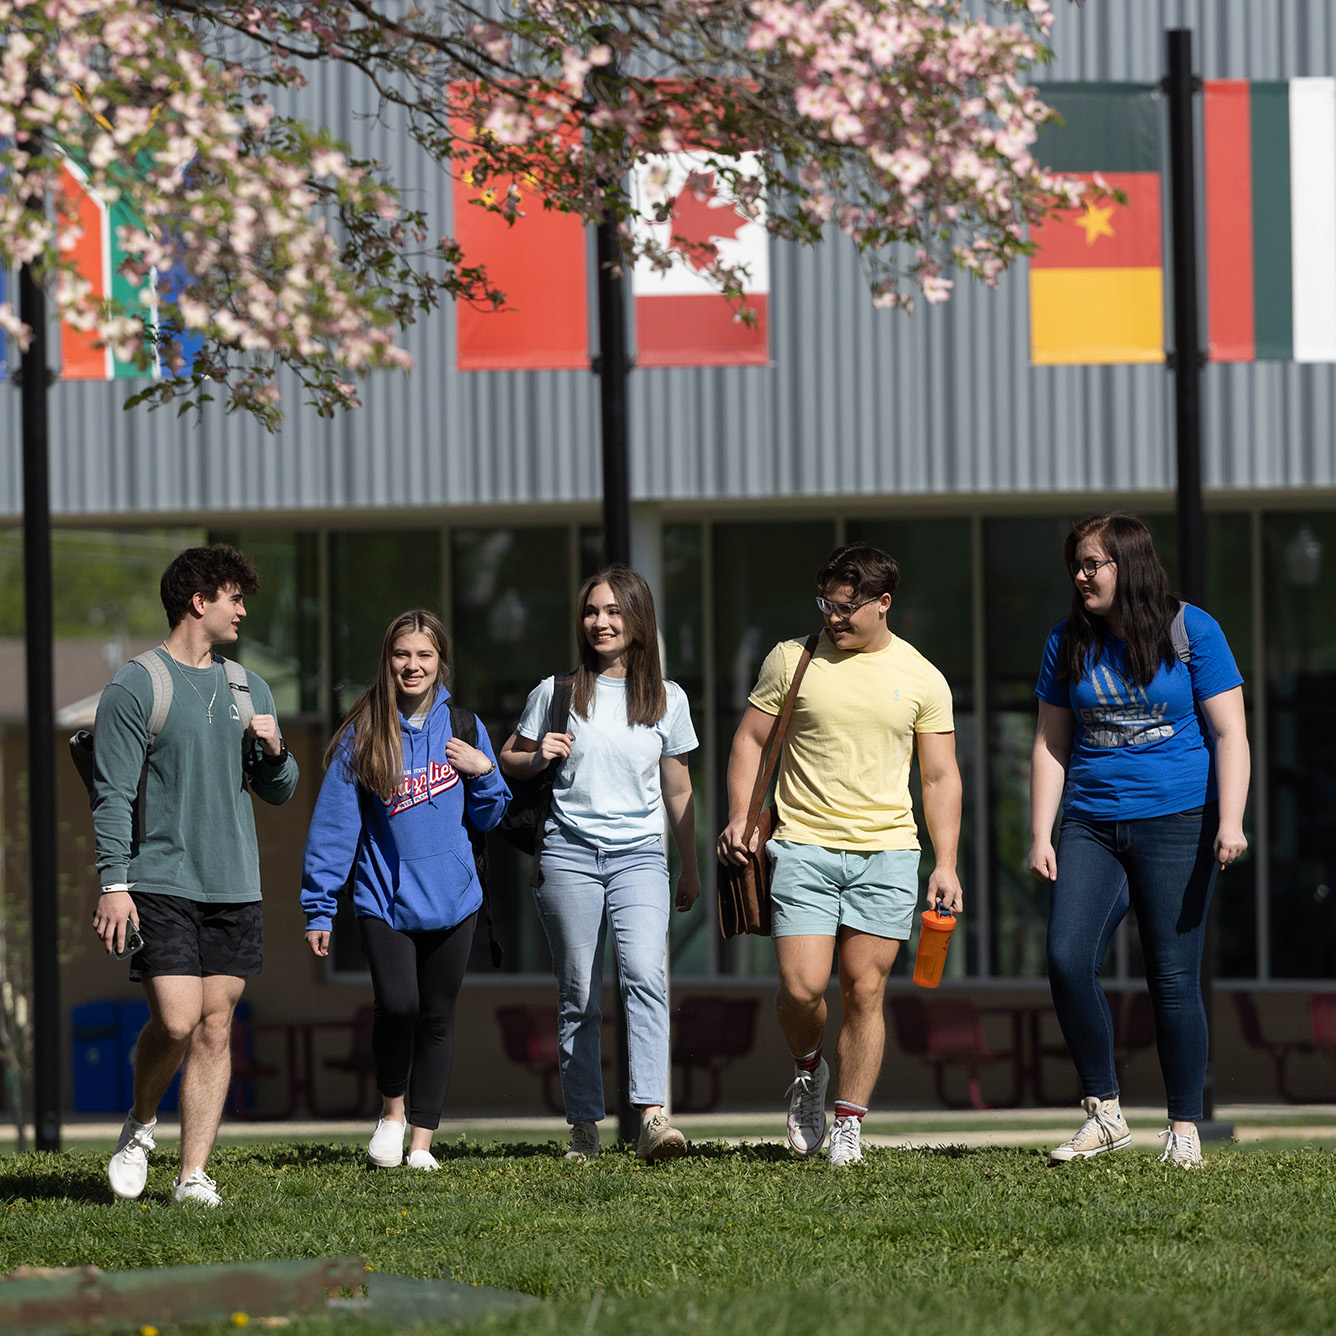 Students walking on campus with flags in the background